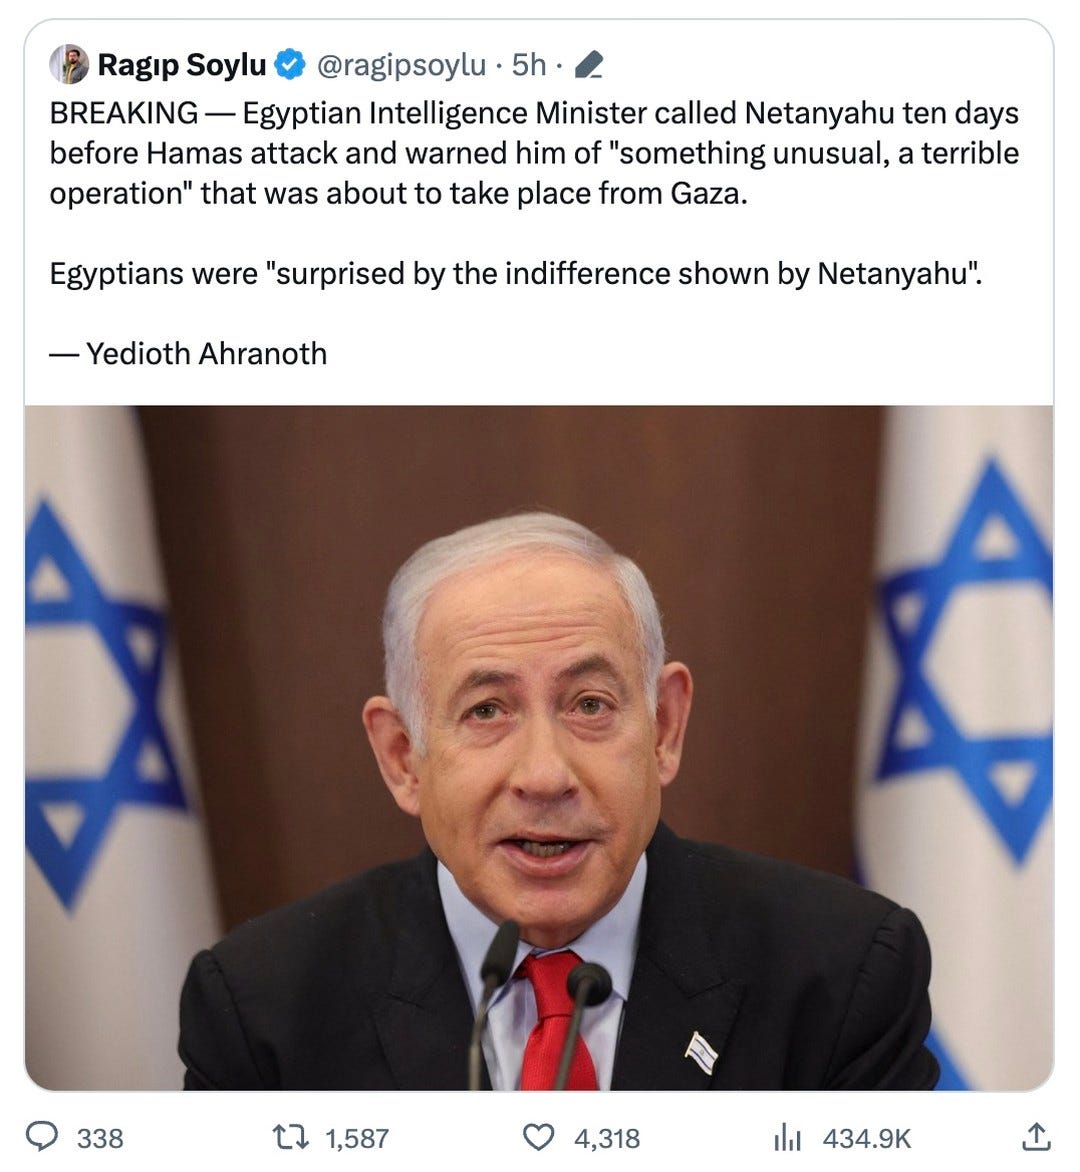 Photo by Seth Abramson on October 09, 2023. May be a Twitter screenshot of 1 person and text that says 'Ragıp Soylu @ragipsoylu 5h BREAKING Egyptian Intelligence Minister called Netanyahu ten days before Hamas attack and warned him of "something unusual, a terrible operation" that was about to take place from Gaza. Egyptians were "surprised by the indifference shown by Netanyahu". -Yedioth Ahranoth 338 × 1,587 4,318 434.9K ↑'.